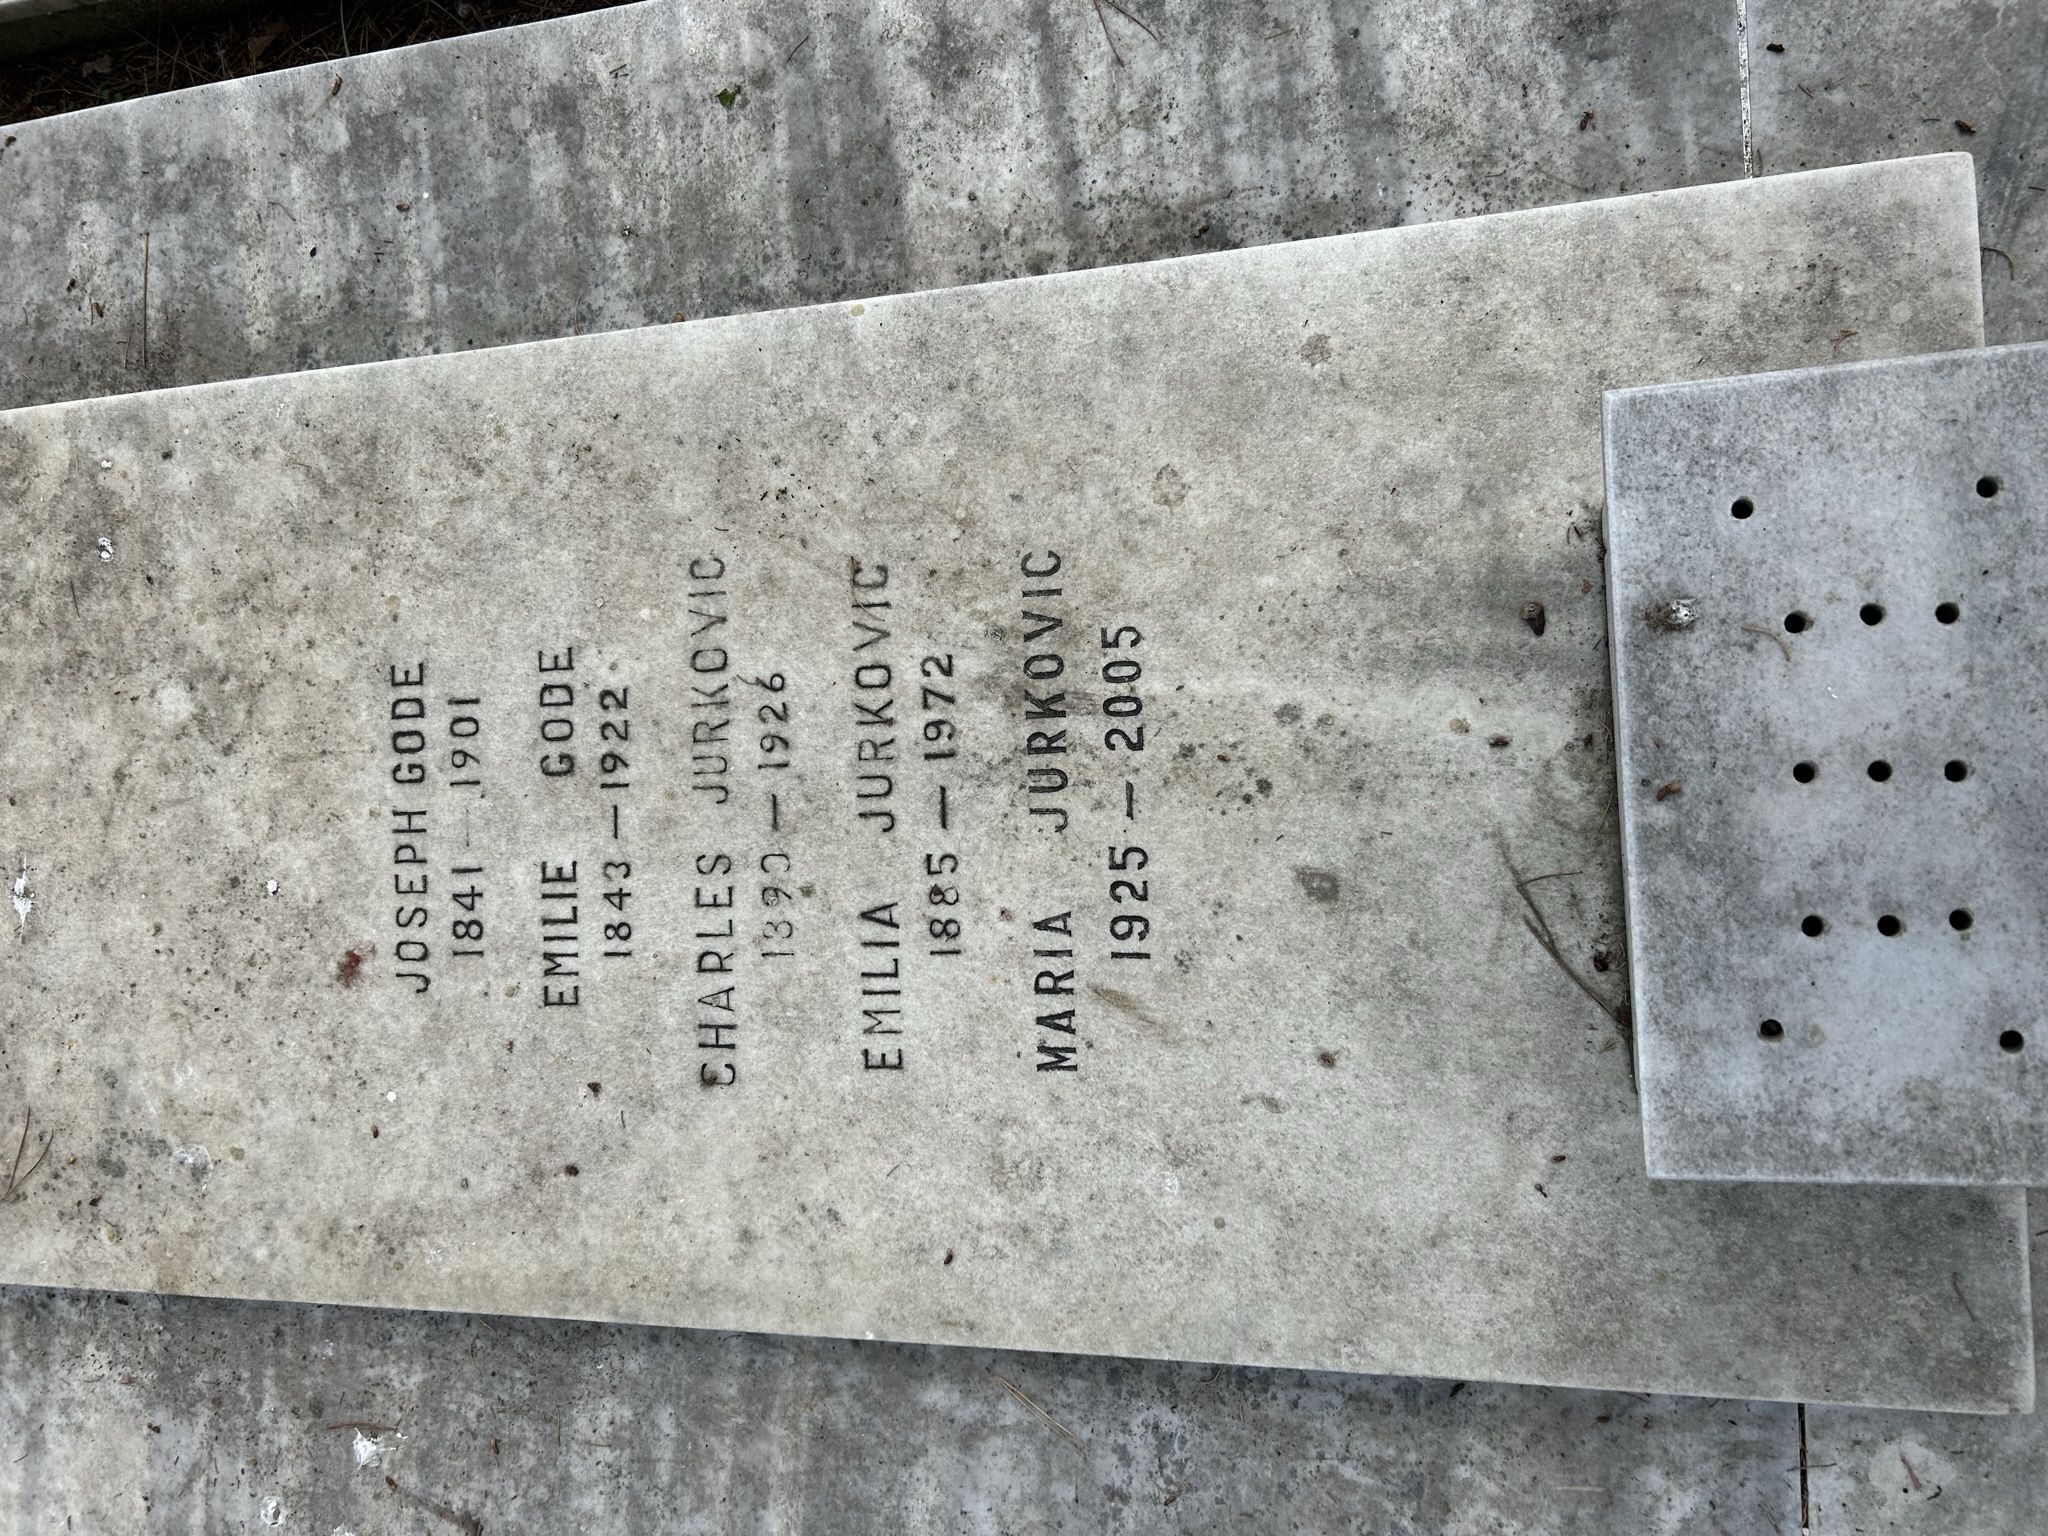 Inscription from the tombstone of the Jurkovic family, Catholic cemetery in Feriköy